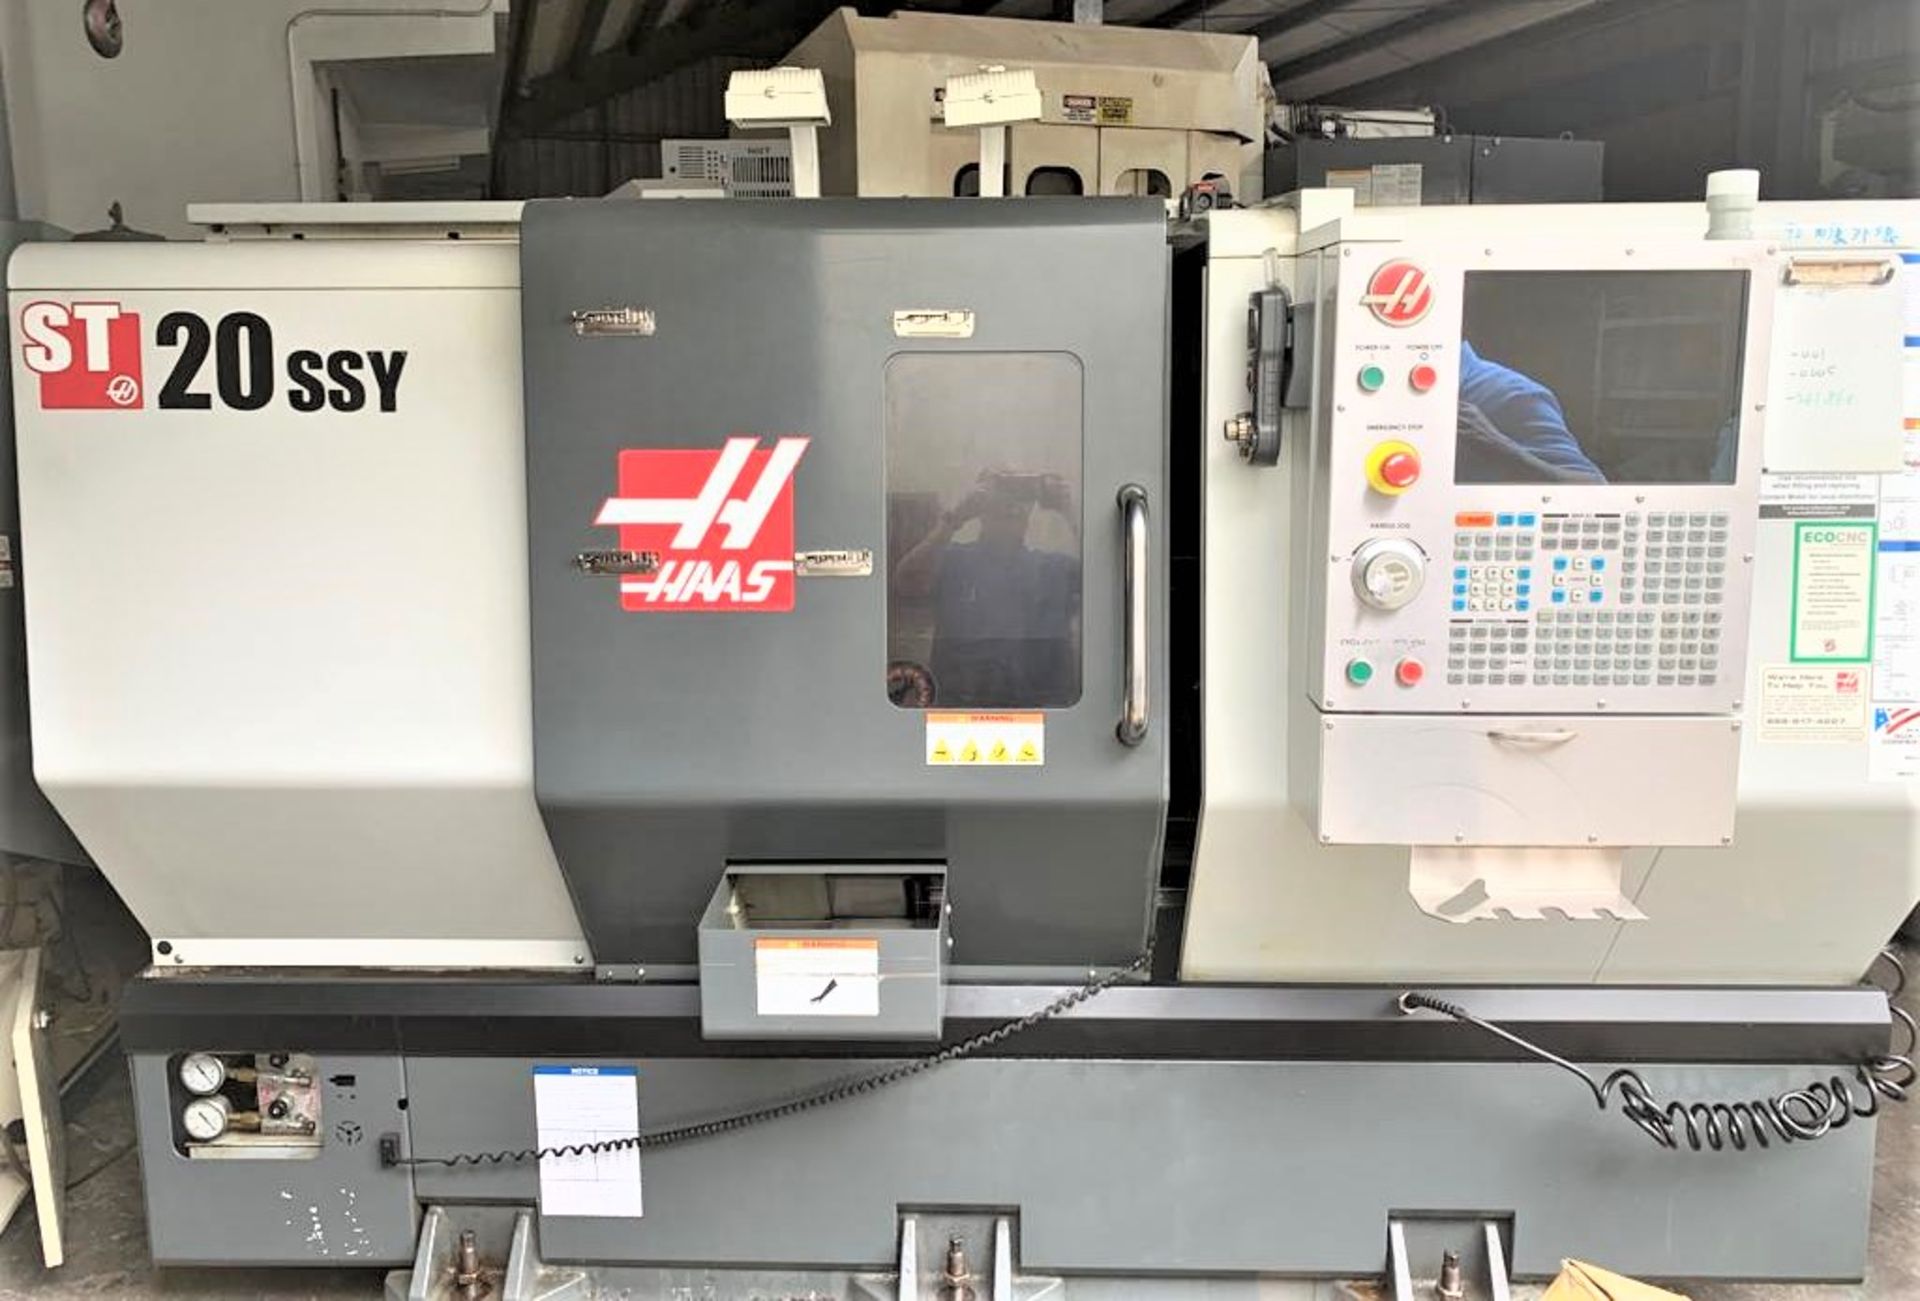 Haas ST20SSy CNC Turning Center W/Live Tooling & Y-Axis, S/N 3089609, New 2011